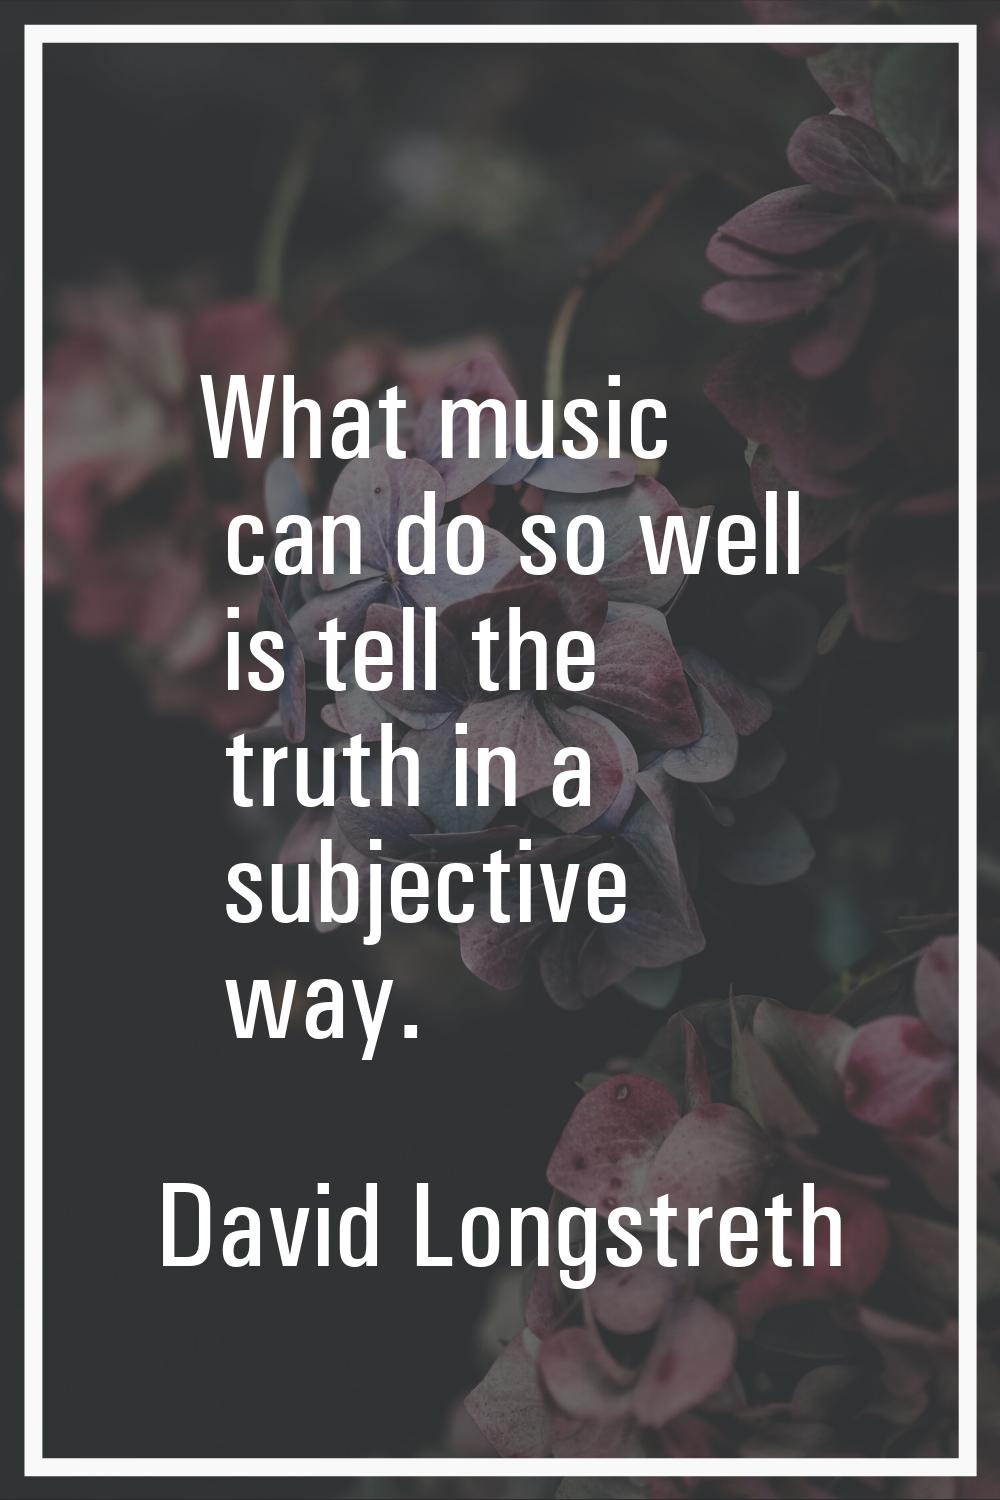 What music can do so well is tell the truth in a subjective way.